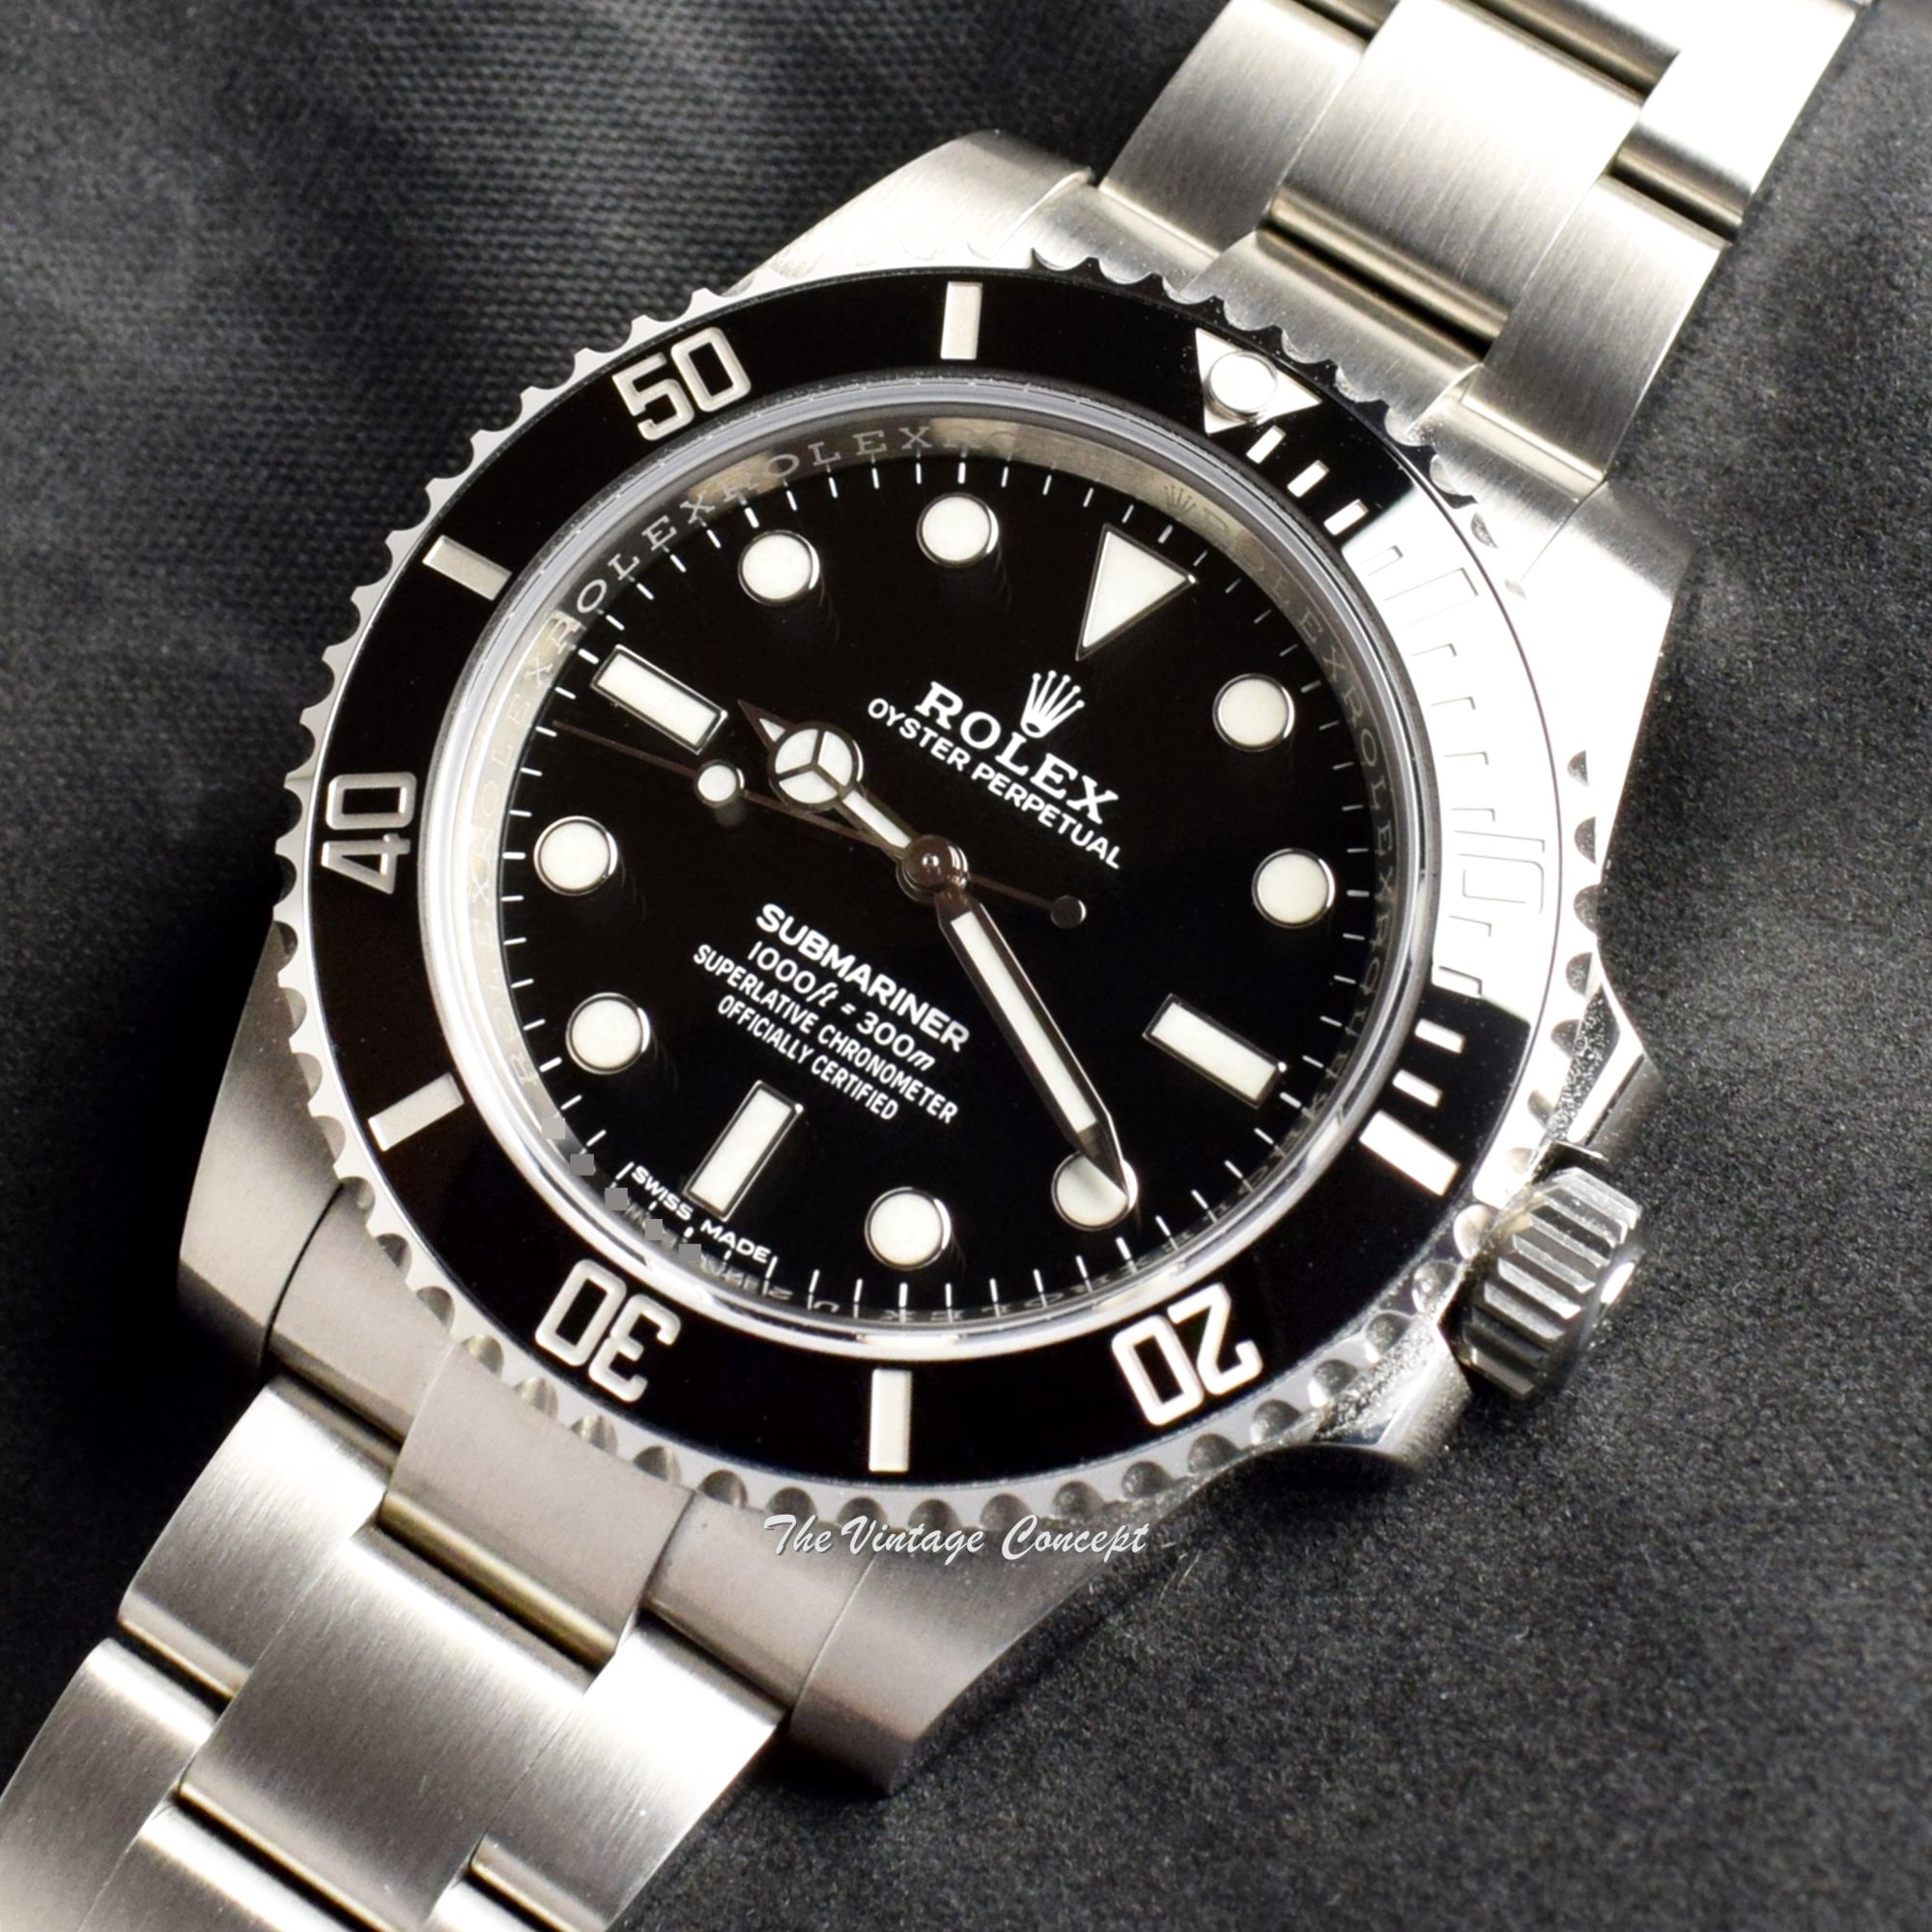 Rolex Submariner No Date 114060 w/ Rolex Guarantee Card (SOLD) - The Vintage Concept